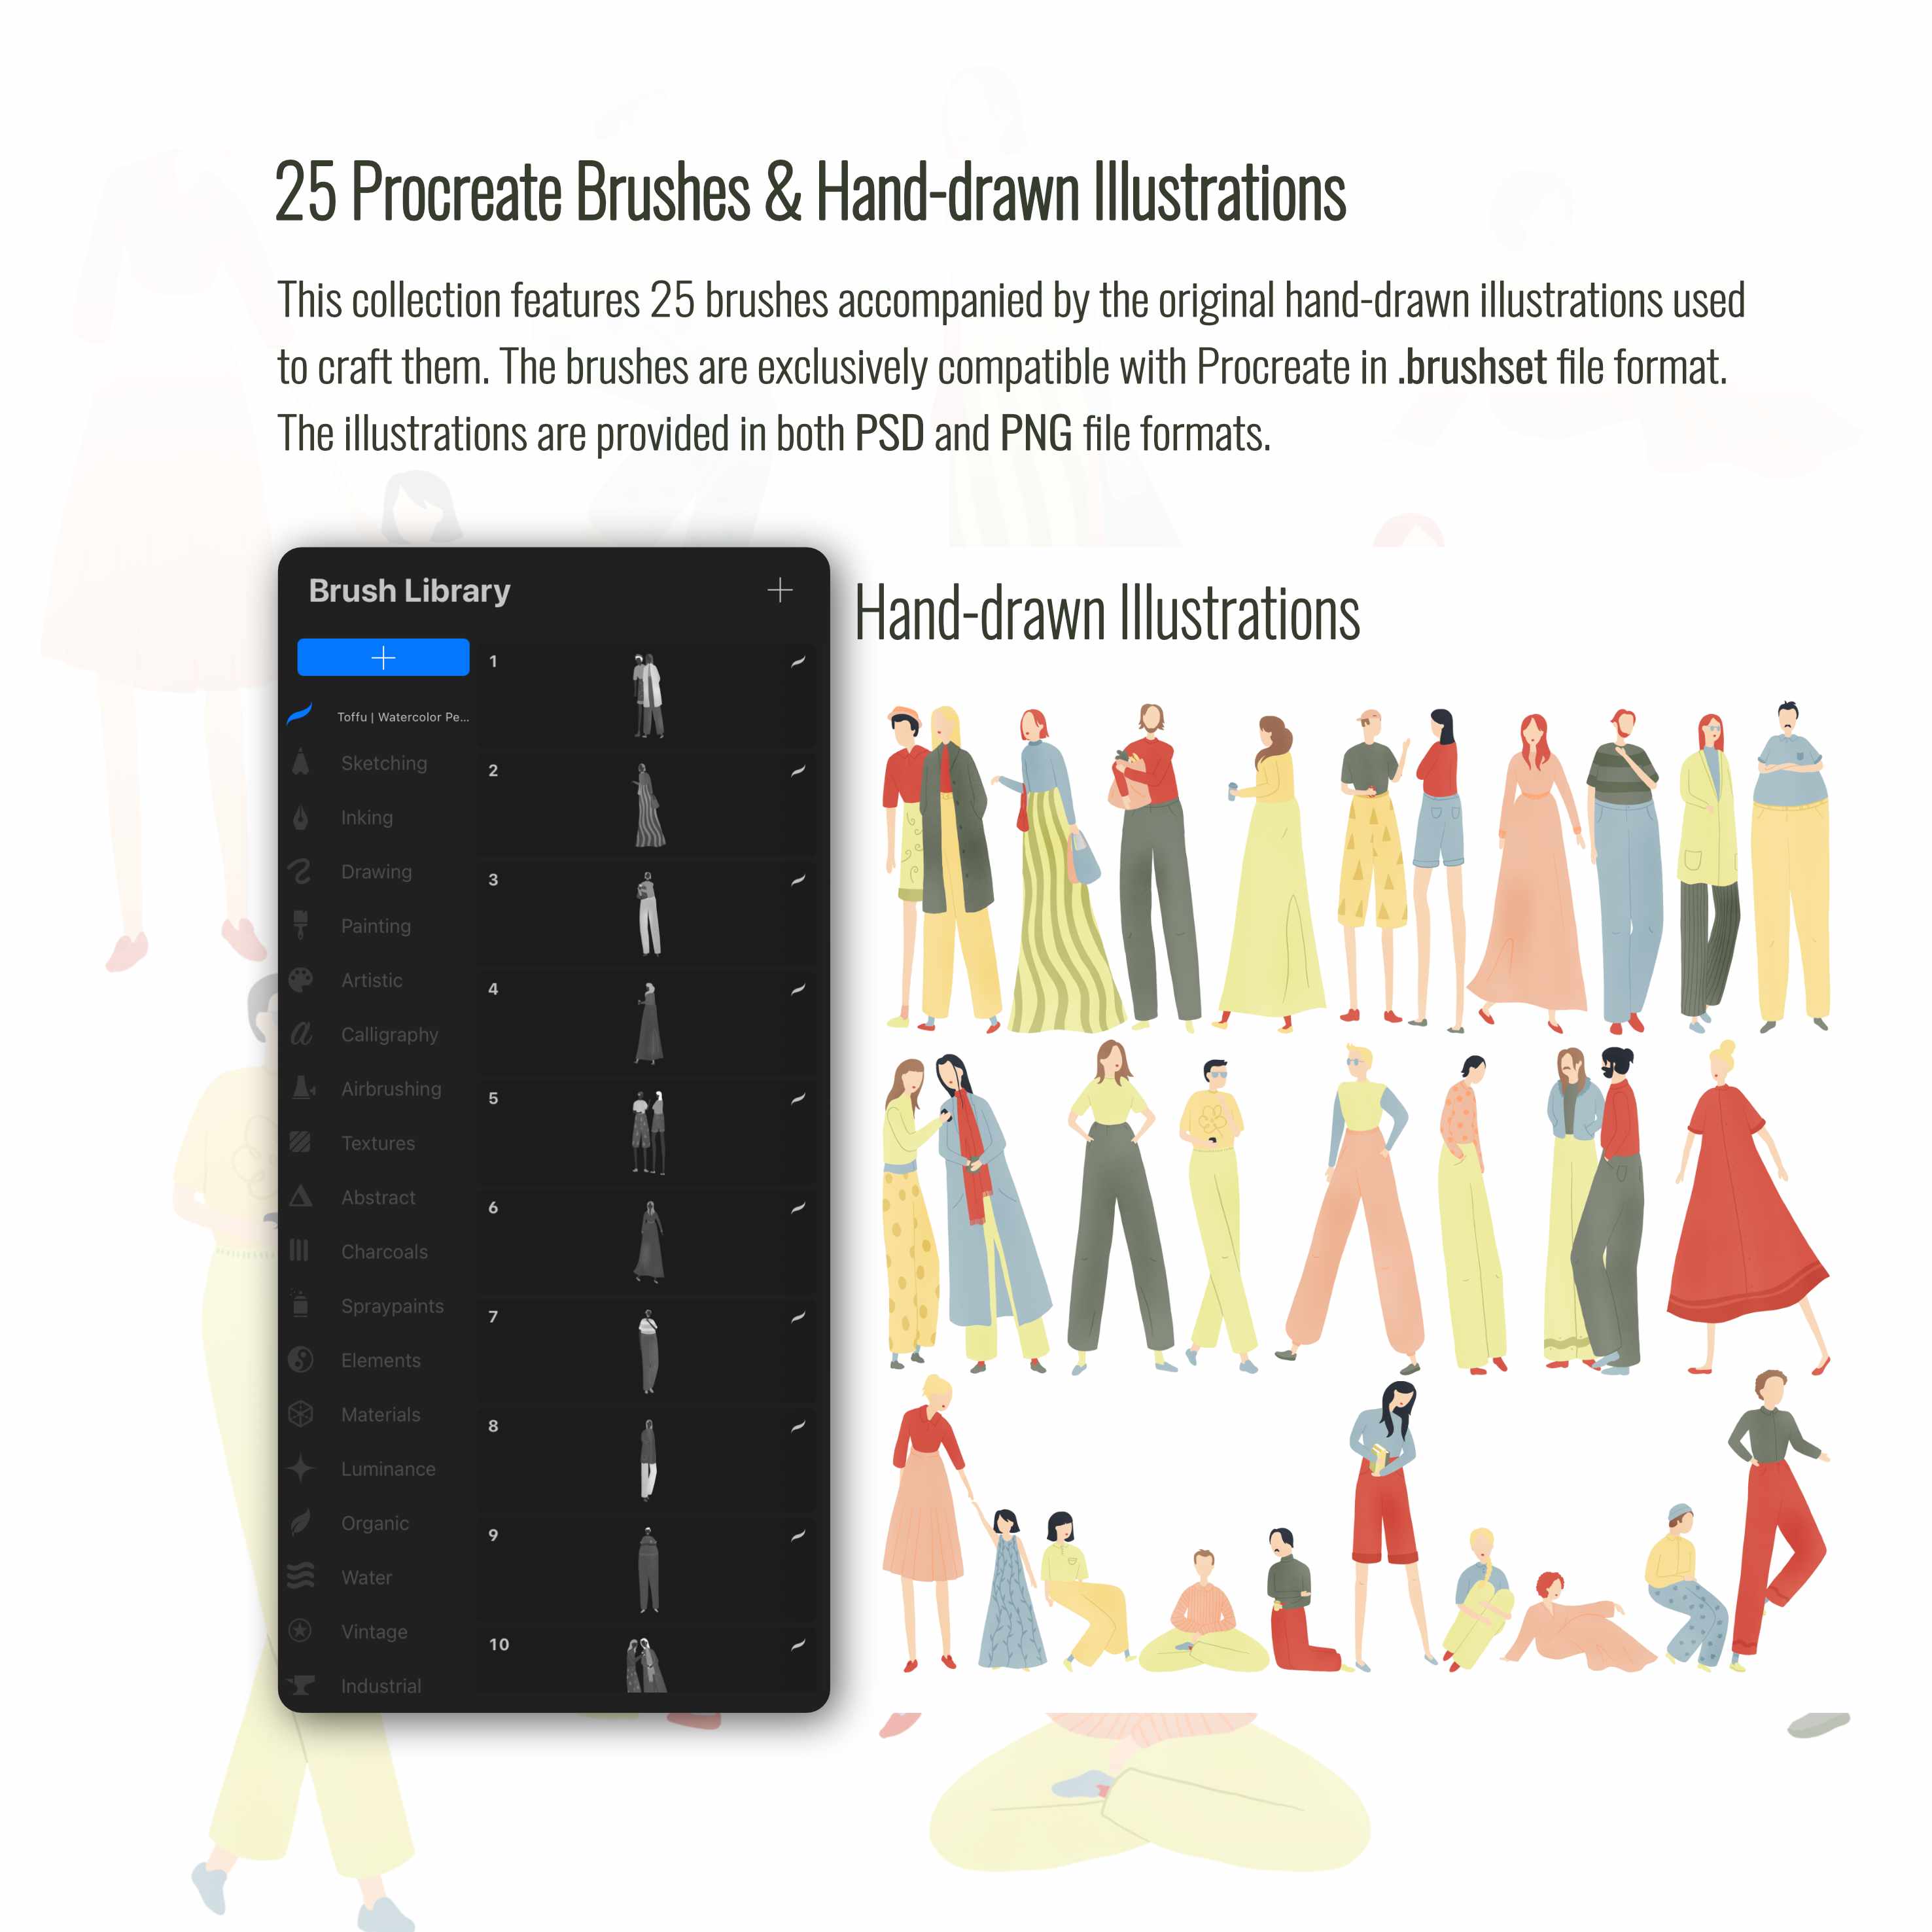 Procreate Watercolor People Brushset & Illustrations PNG - Toffu Co